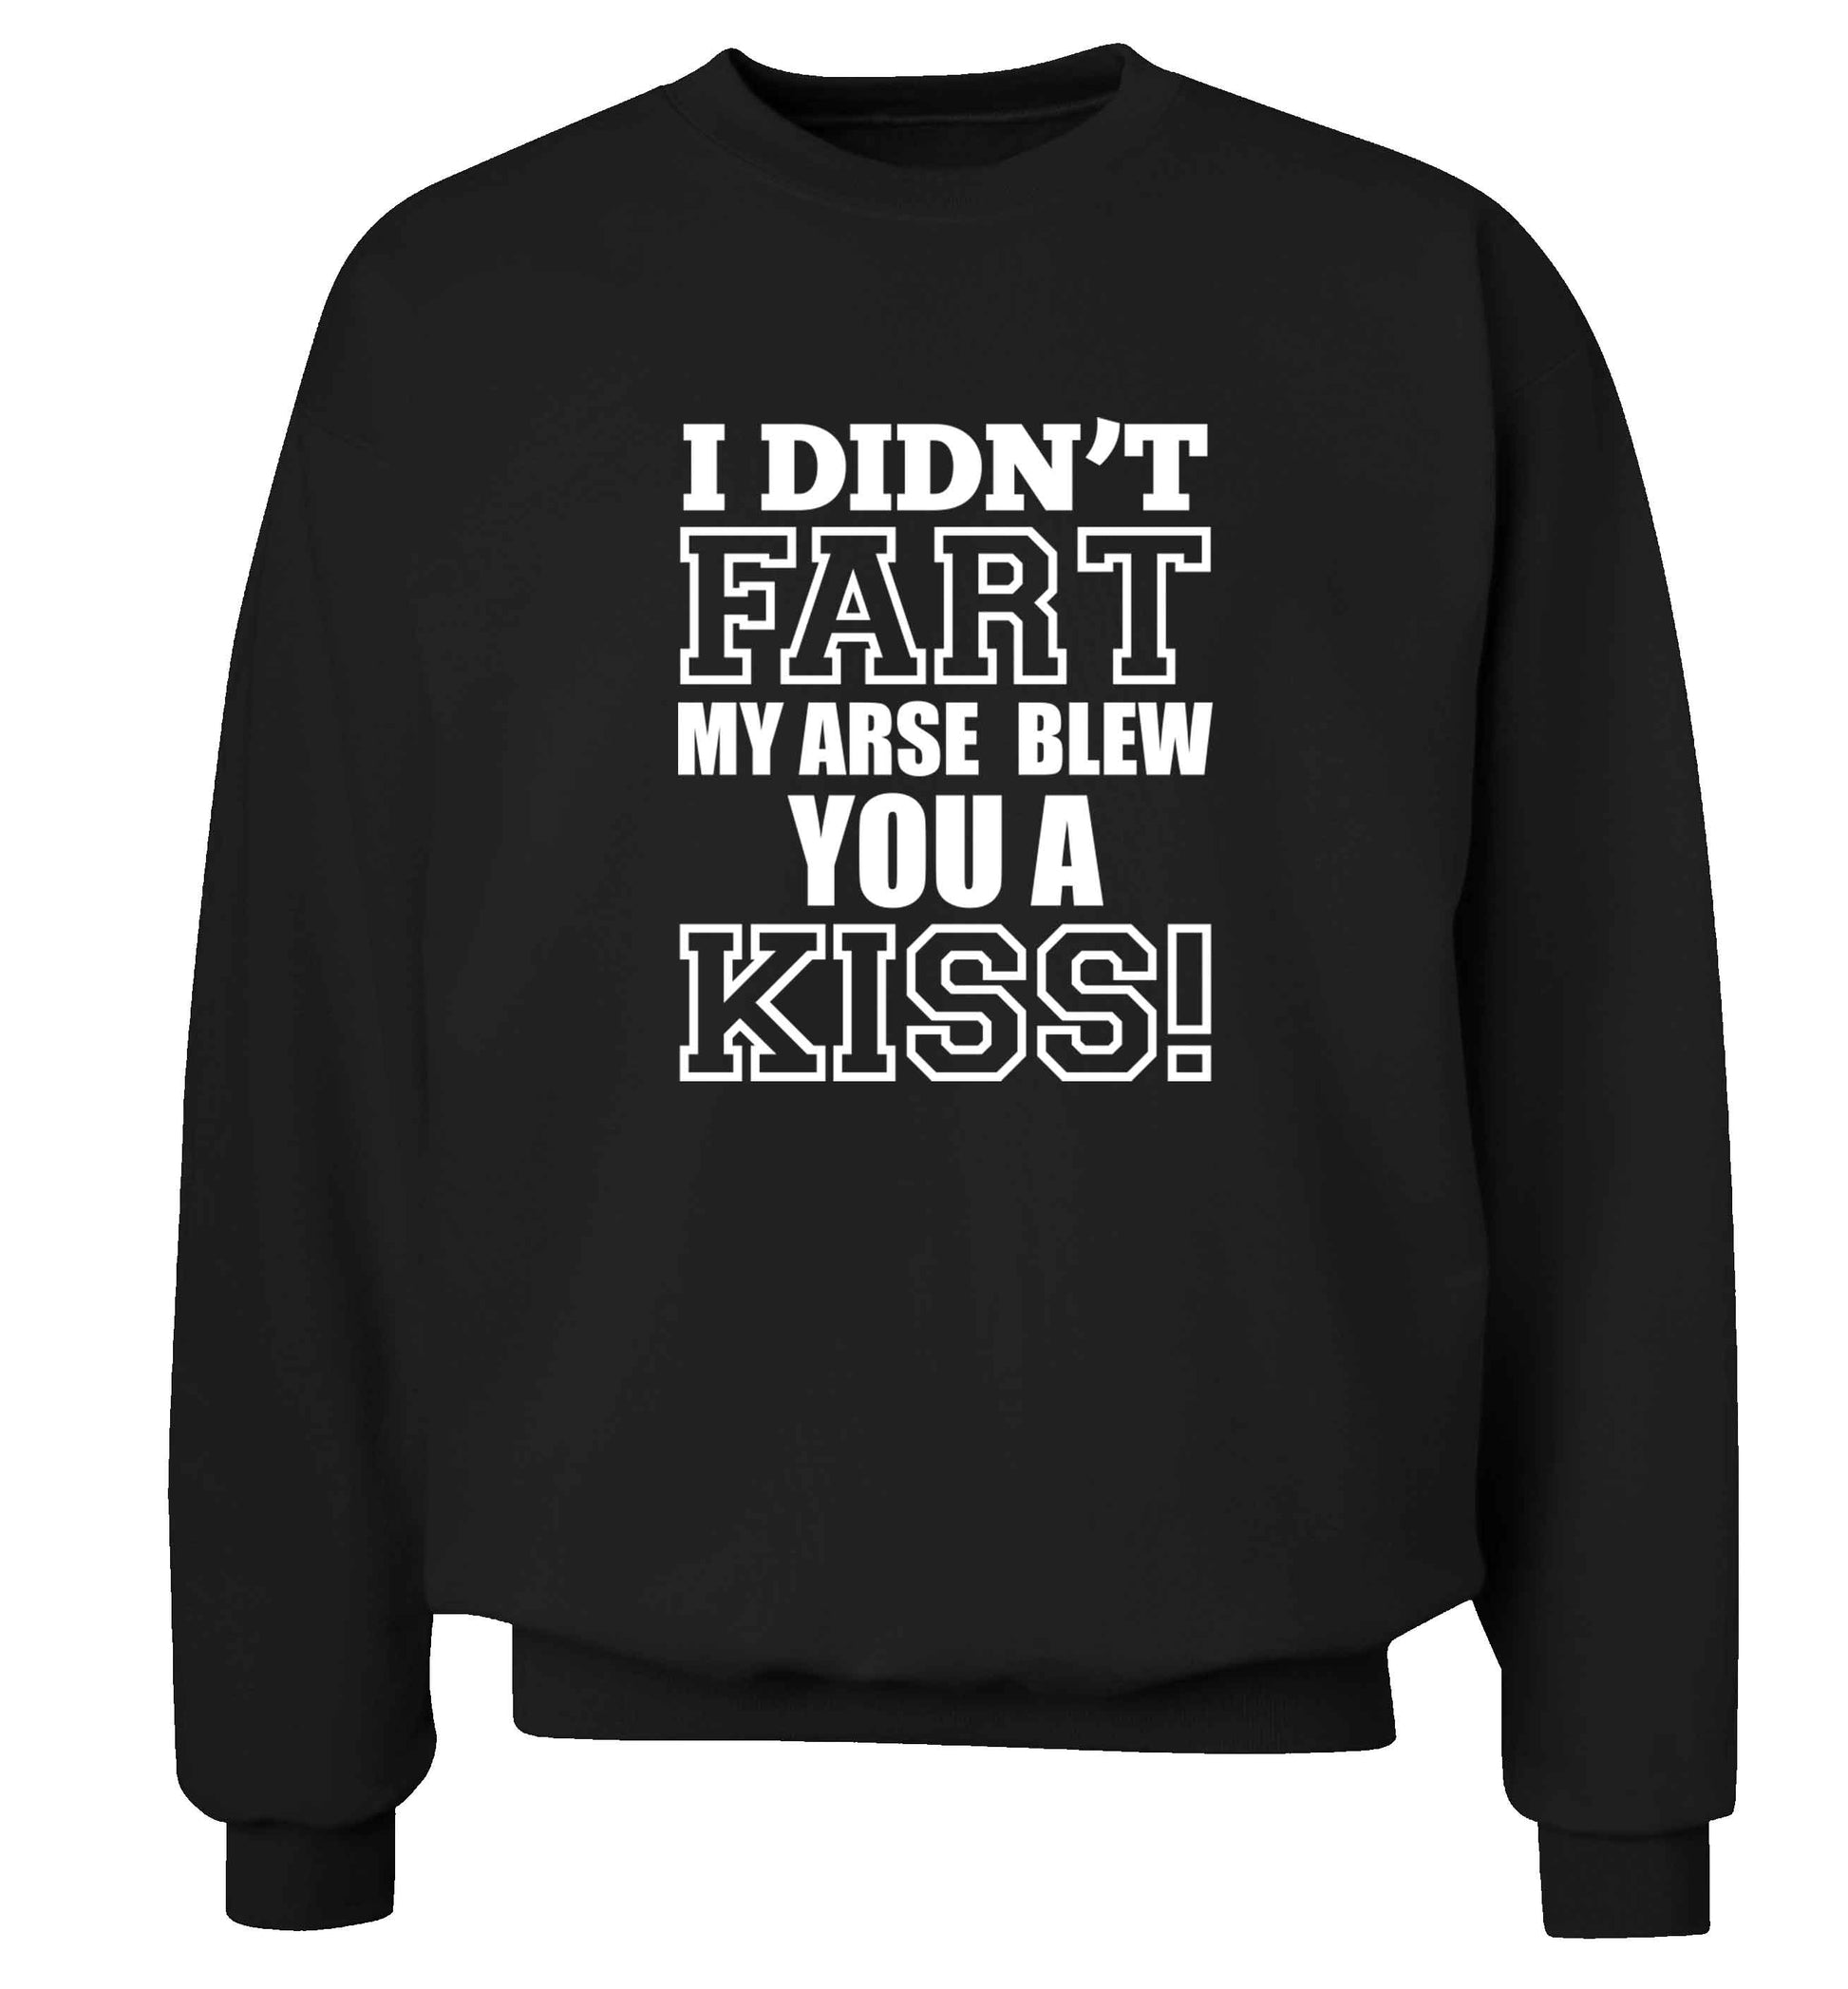 I didn't fart my arse blew you a kiss adult's unisex black sweater 2XL